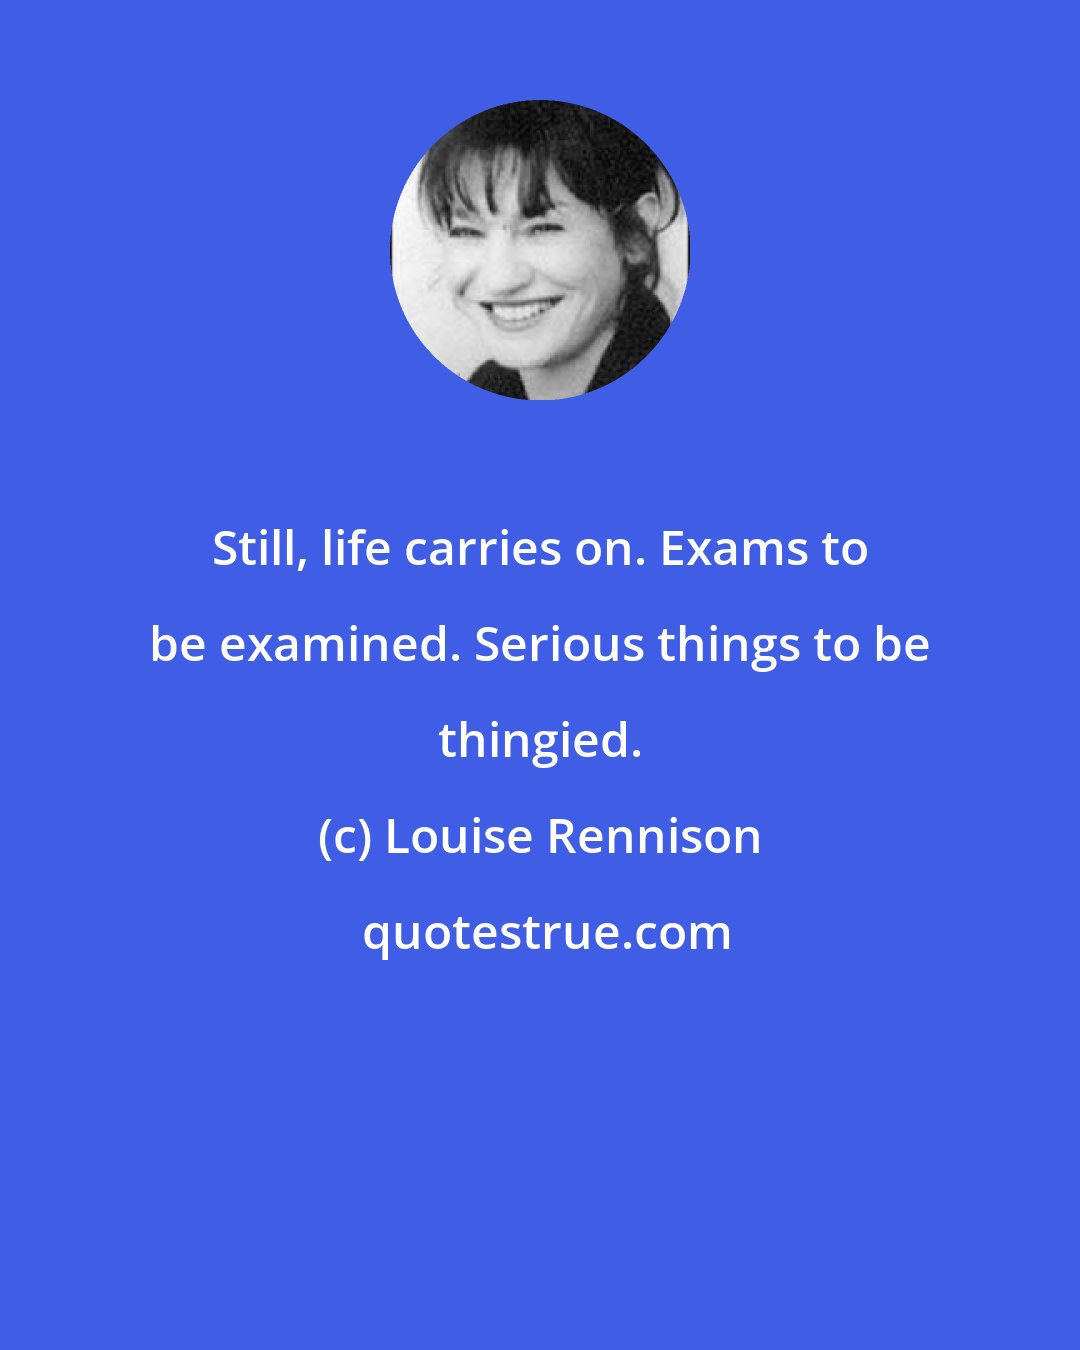 Louise Rennison: Still, life carries on. Exams to be examined. Serious things to be thingied.